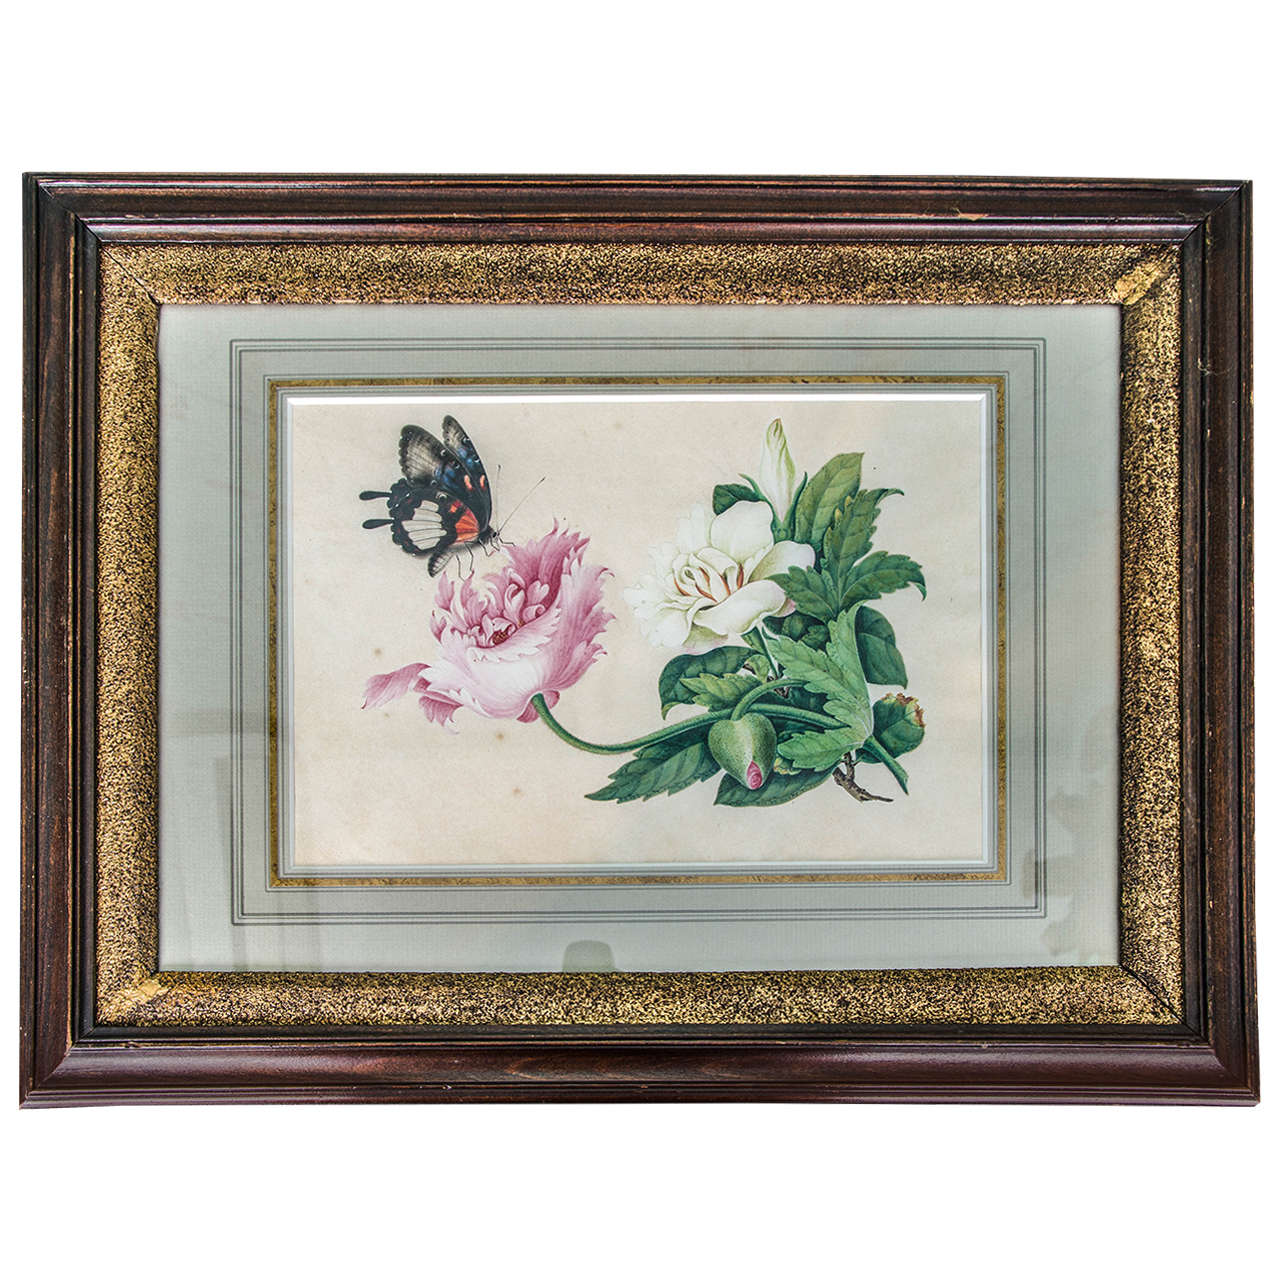 Early 19th Century Chinese Watercolour on Paper in a Georgian Frame